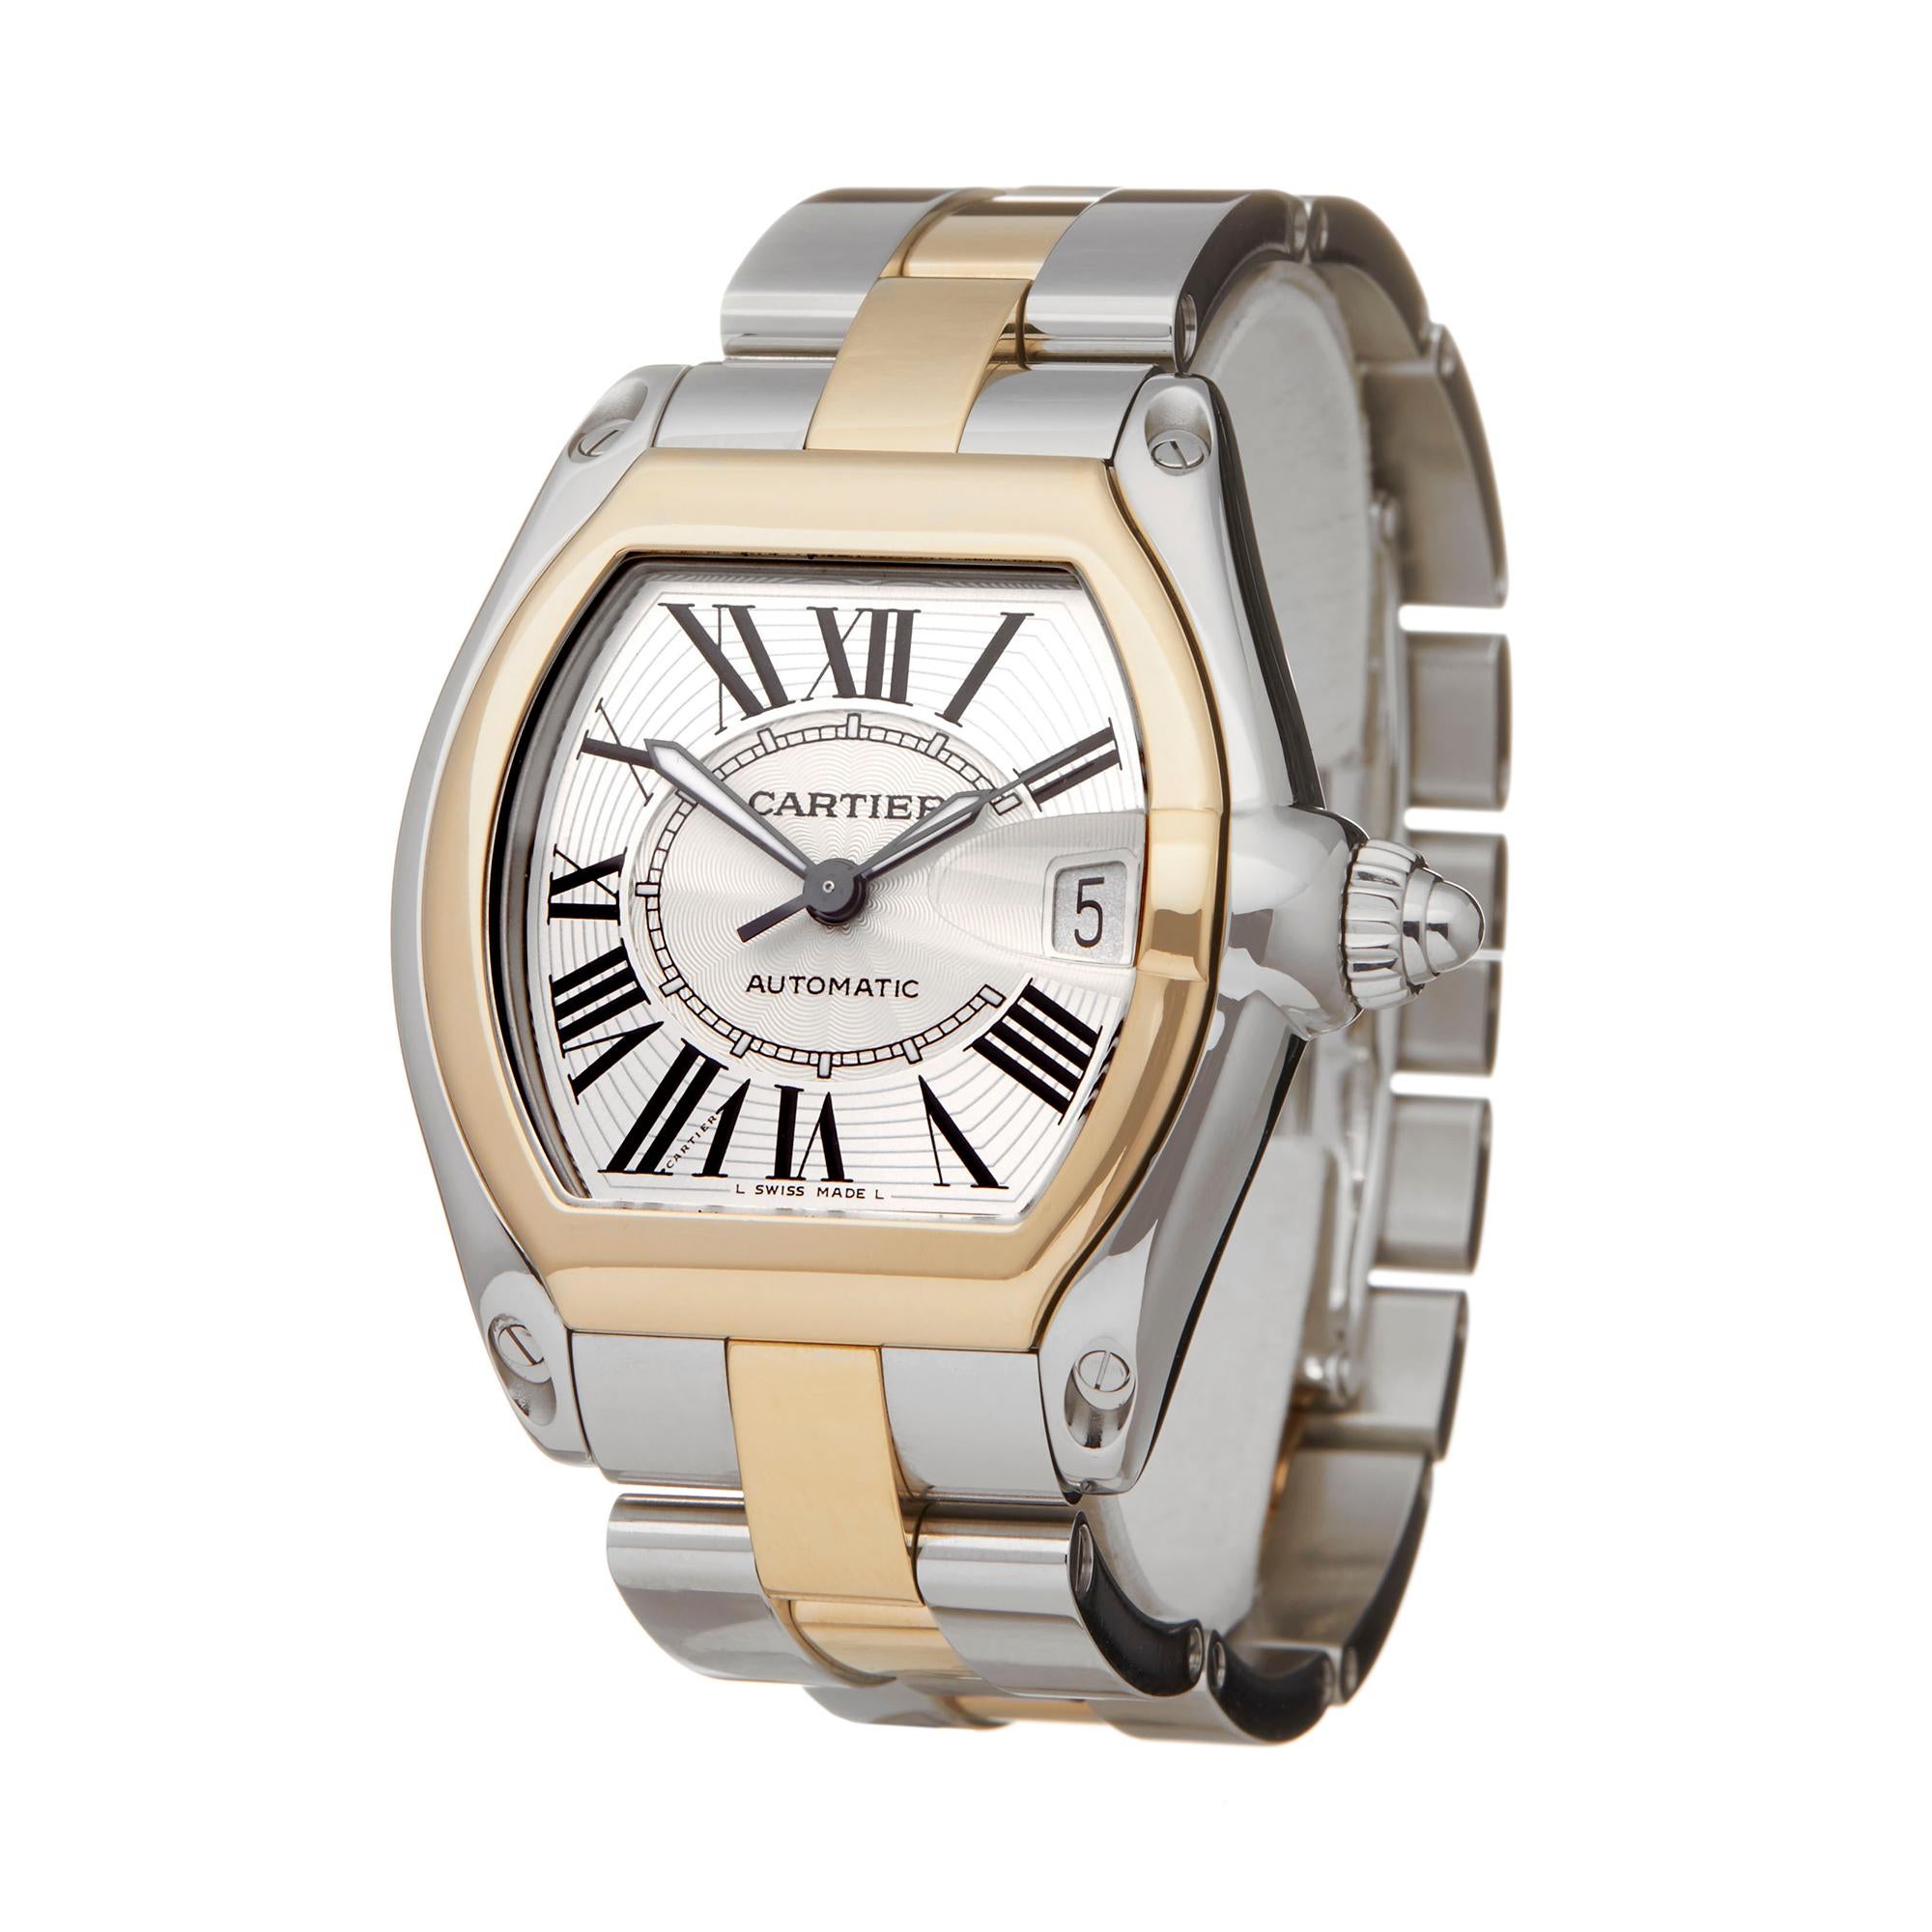 Ref: COM2215
Manufacturer: Cartier
Model: Roadster
Model Ref: 2510 or W62031Y4
Age: 10th October 2015
Gender: Mens
Complete With: Service Pouch, Service Papers & Receipt From Purchase
Dial: Silver Roman
Glass: Sapphire Crystal
Movement: